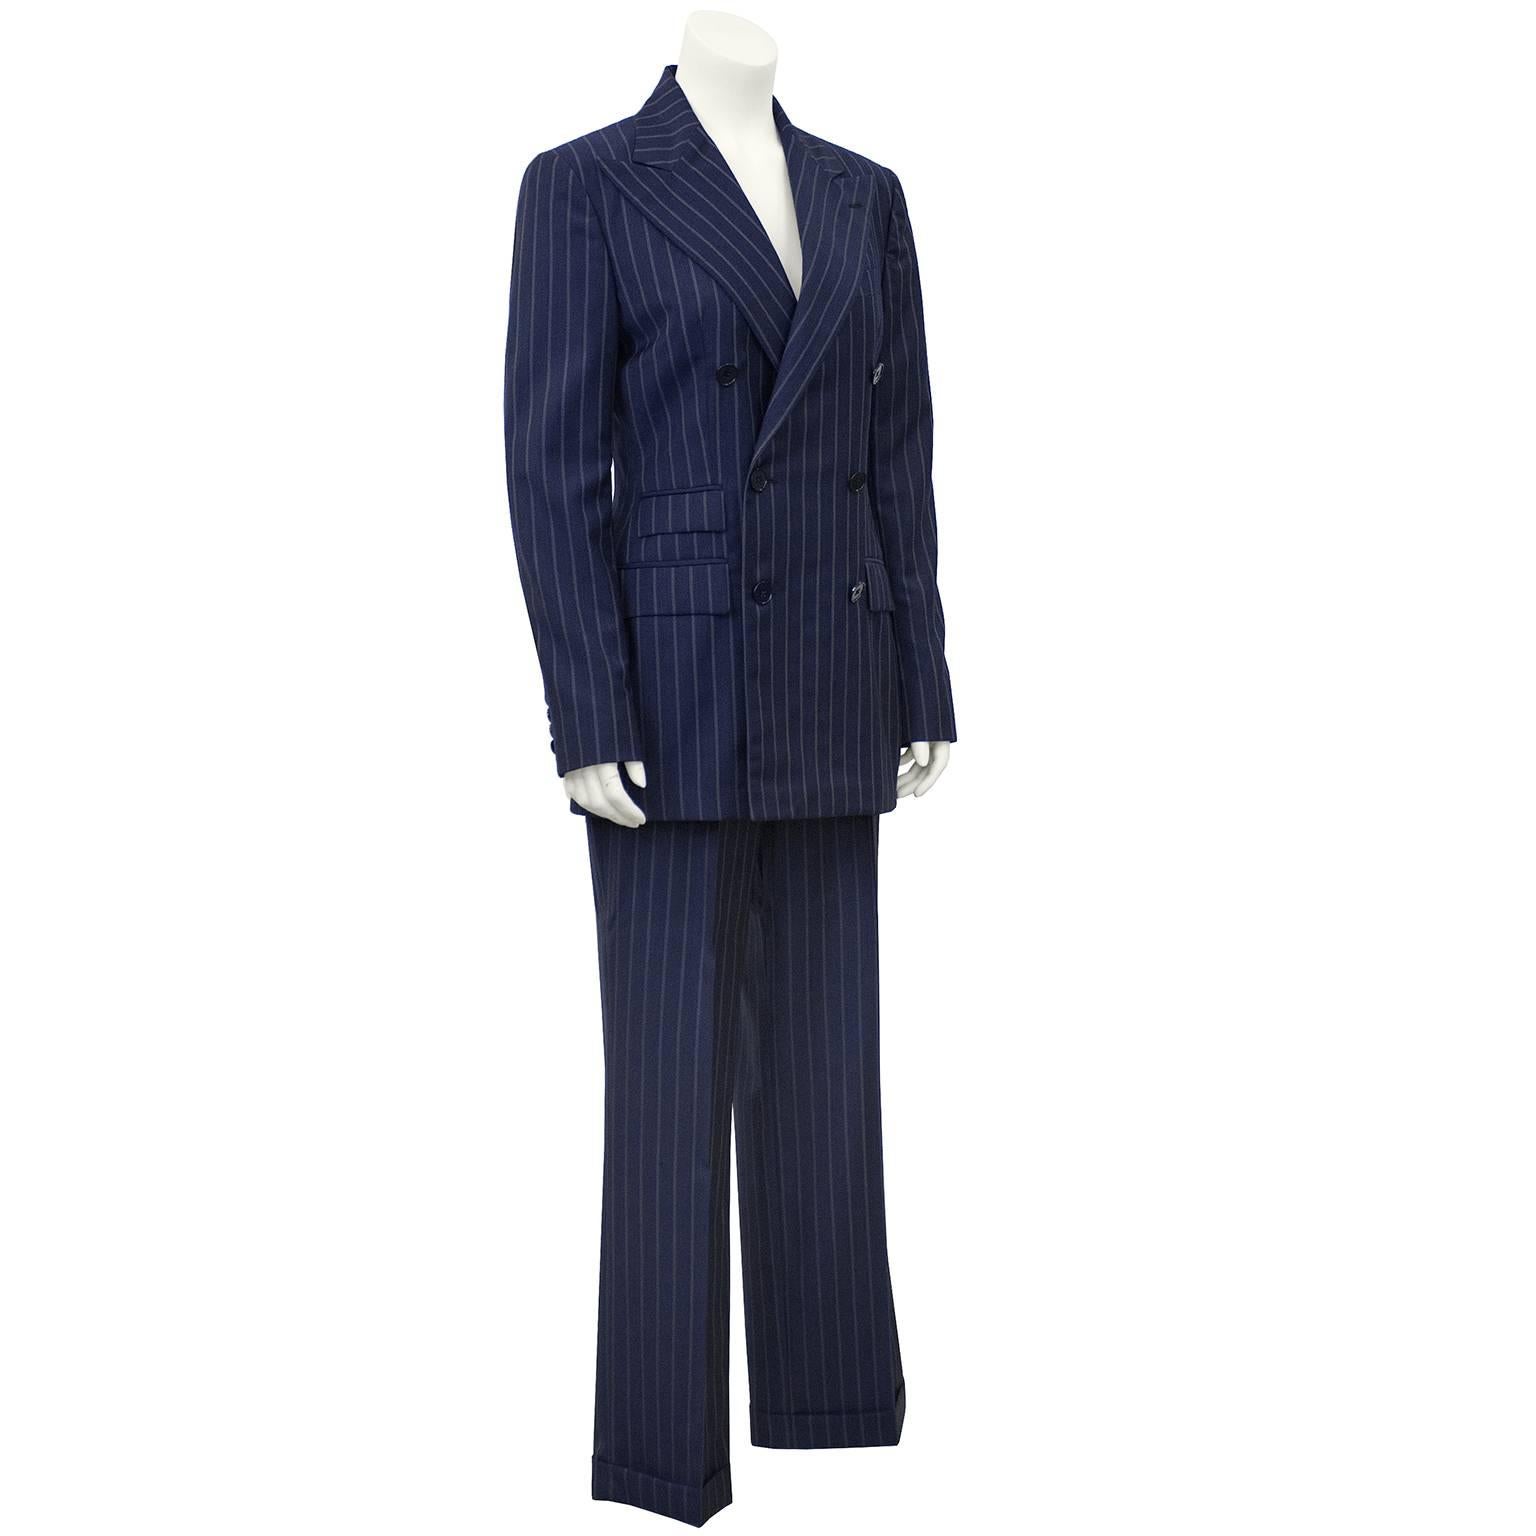 1990's Ralph Lauren Collection Classics navy blue and grey light weight wool pin stripe double breasted pant suit. Blazer features exaggerated collar and 3 flap pockets. Pants are high waisted, pleated and cuffed. Excellent vintage condition. Ralph